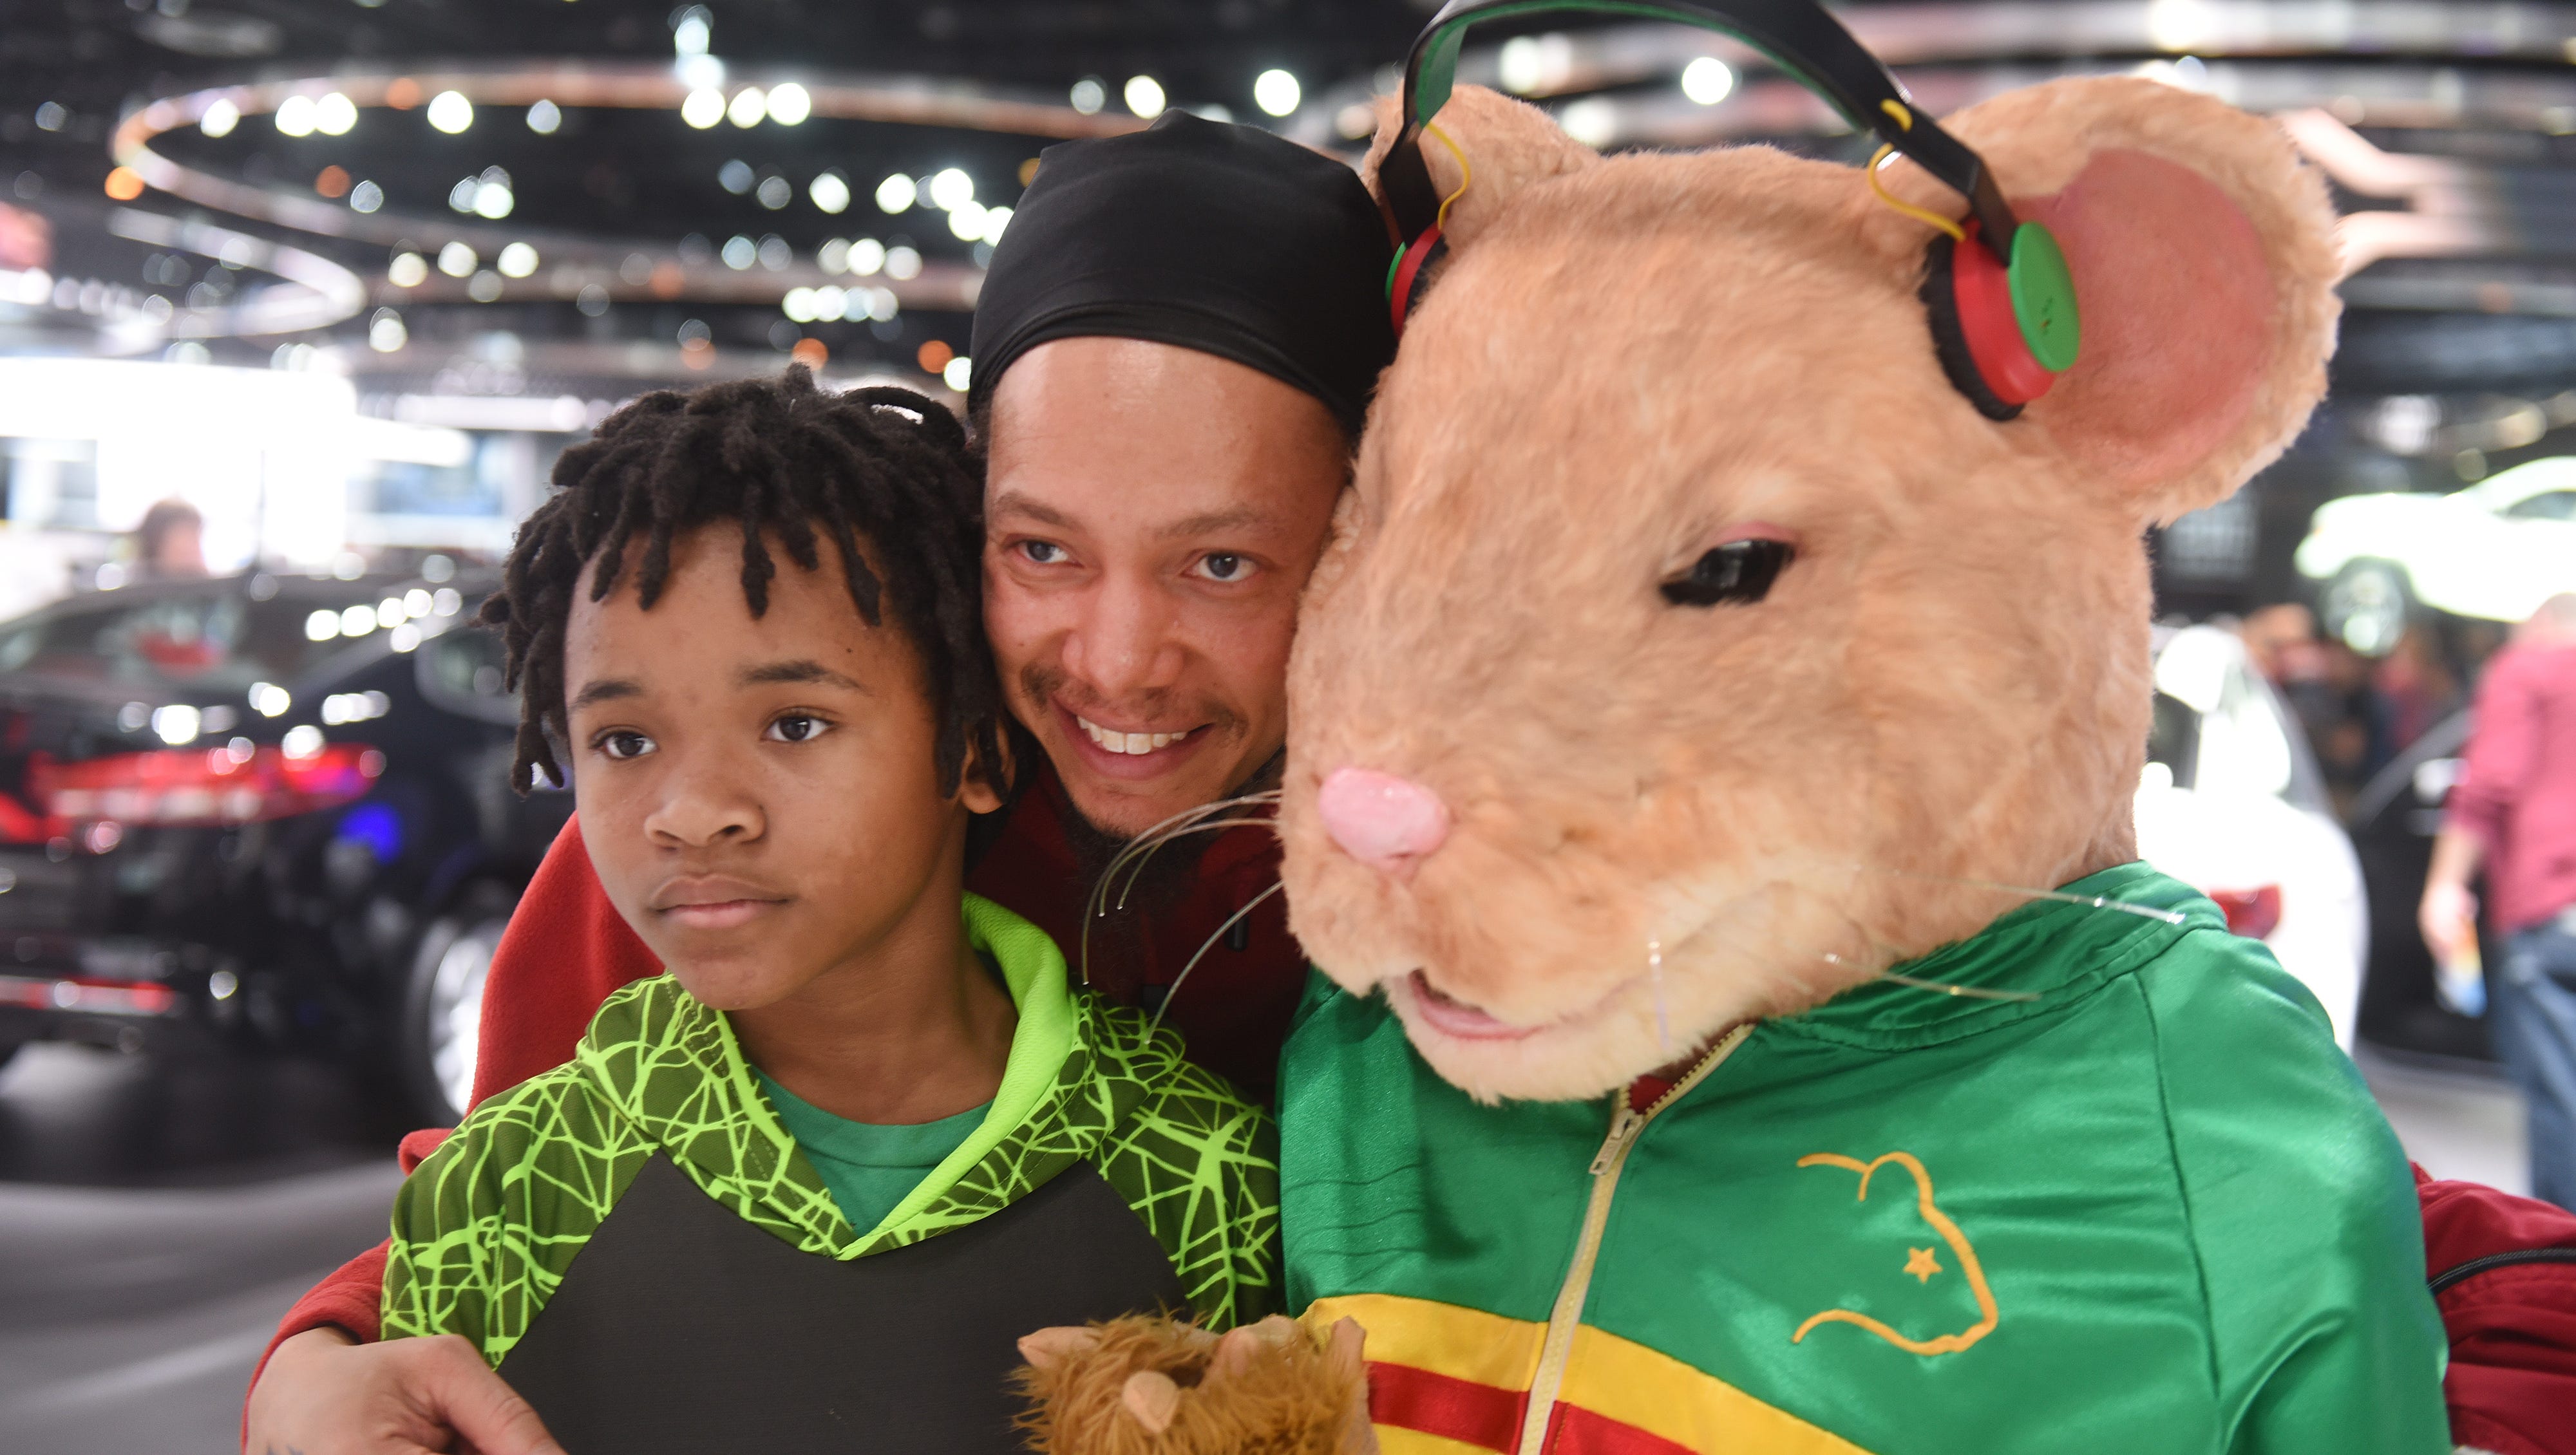 Craig Harris (center), of Cleveland, with his nephew Brandon Hayes, pose with a Kia Motors hamster at the North American International Auto Show